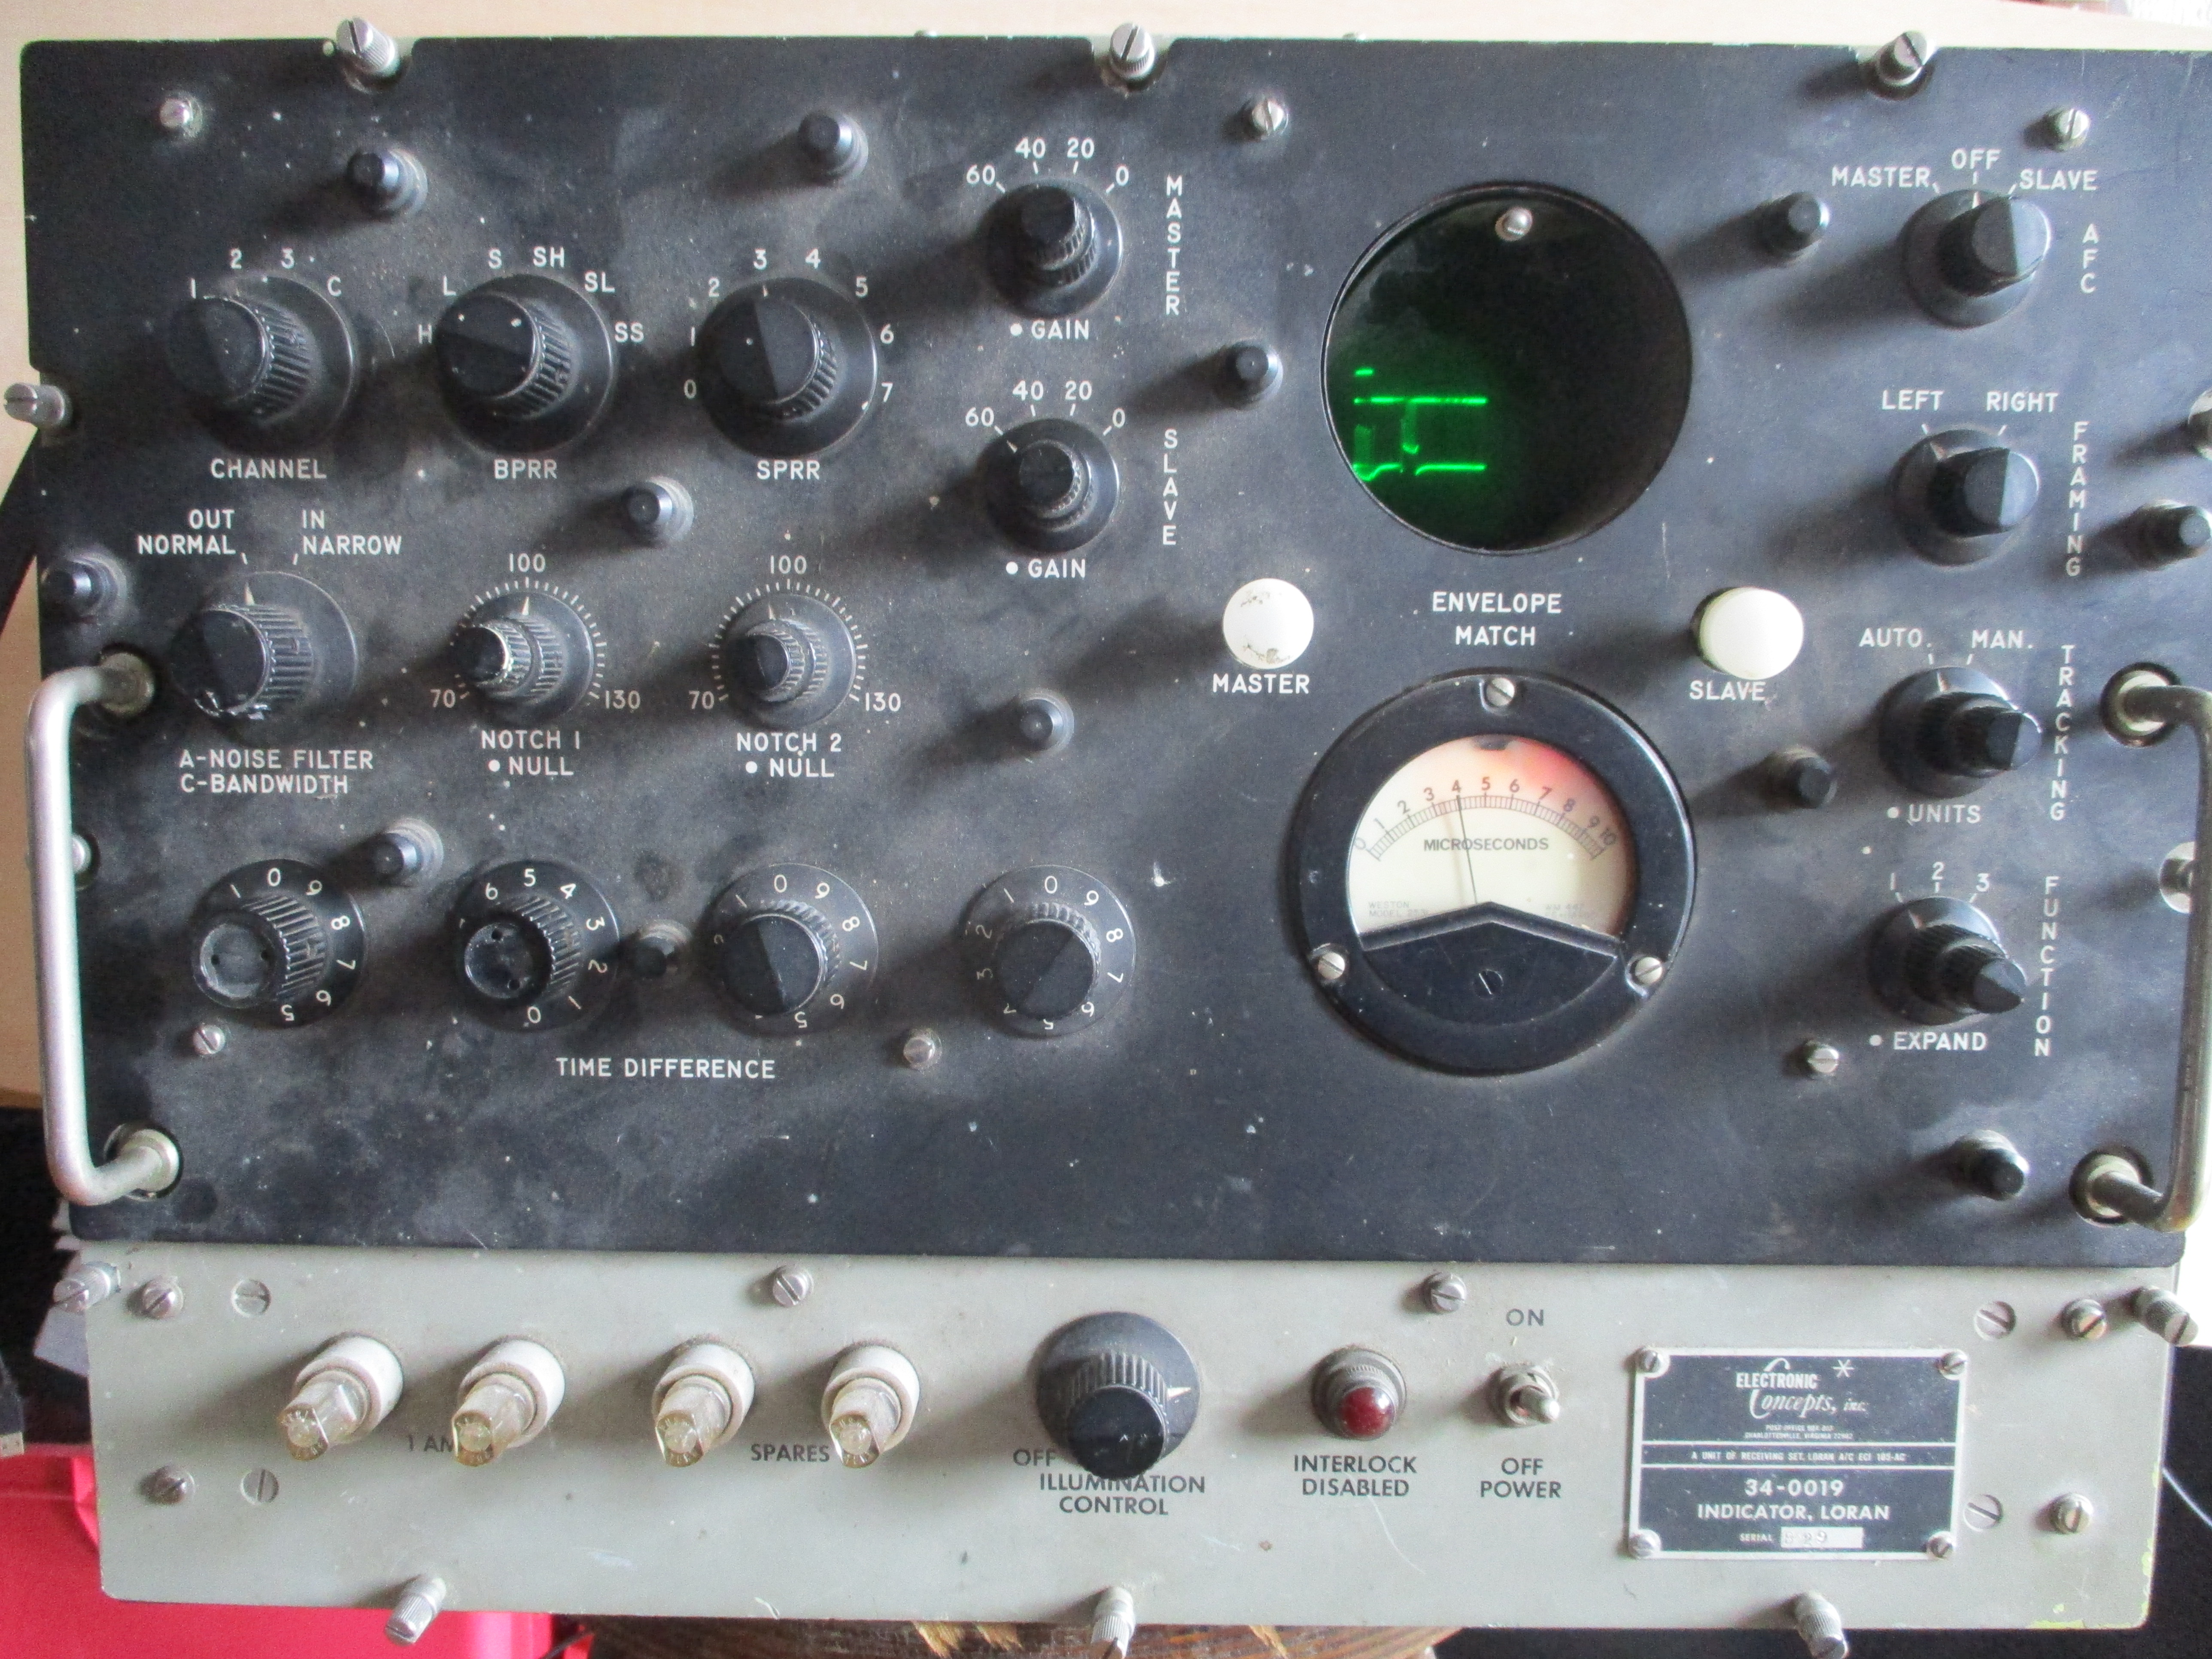 Verry rare and vintage Loran A and C receiver